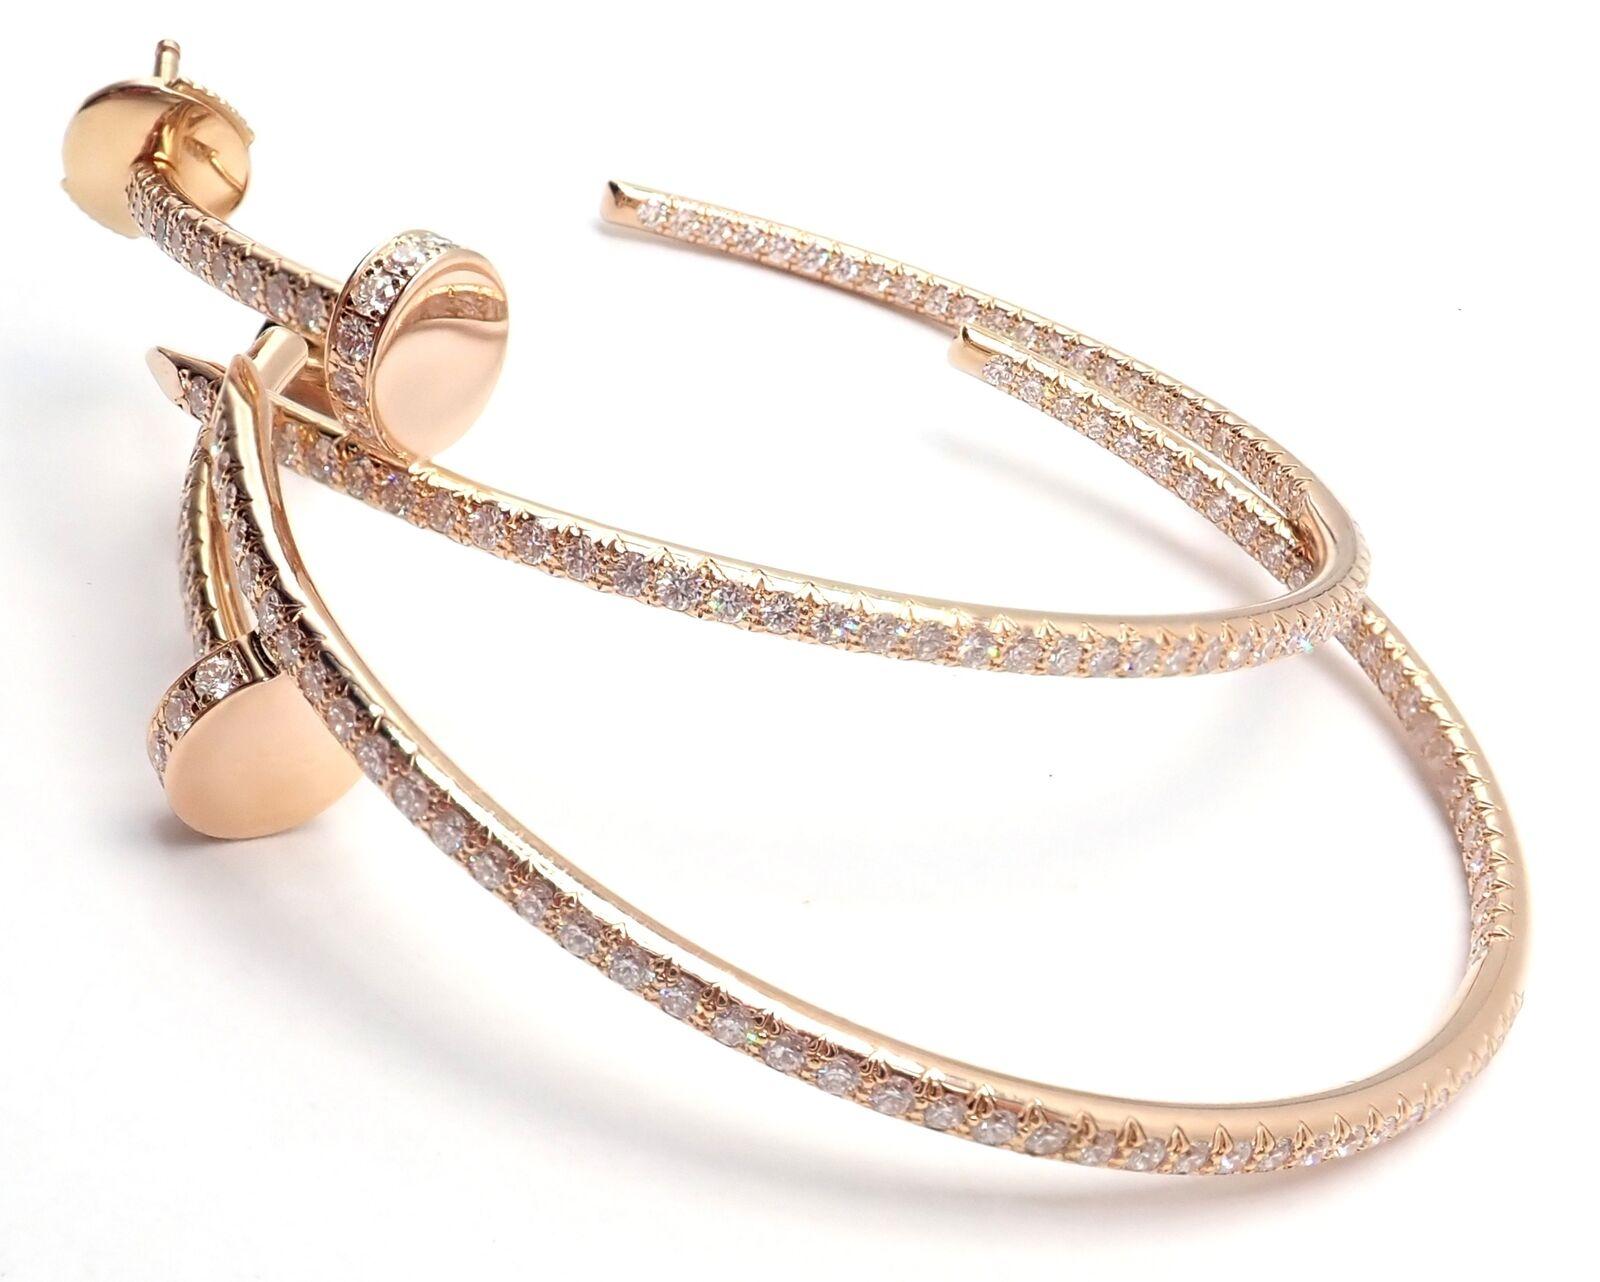 Cartier Juste un Clou Diamond Nail Rose Gold Hoop Earrings In Excellent Condition For Sale In Holland, PA